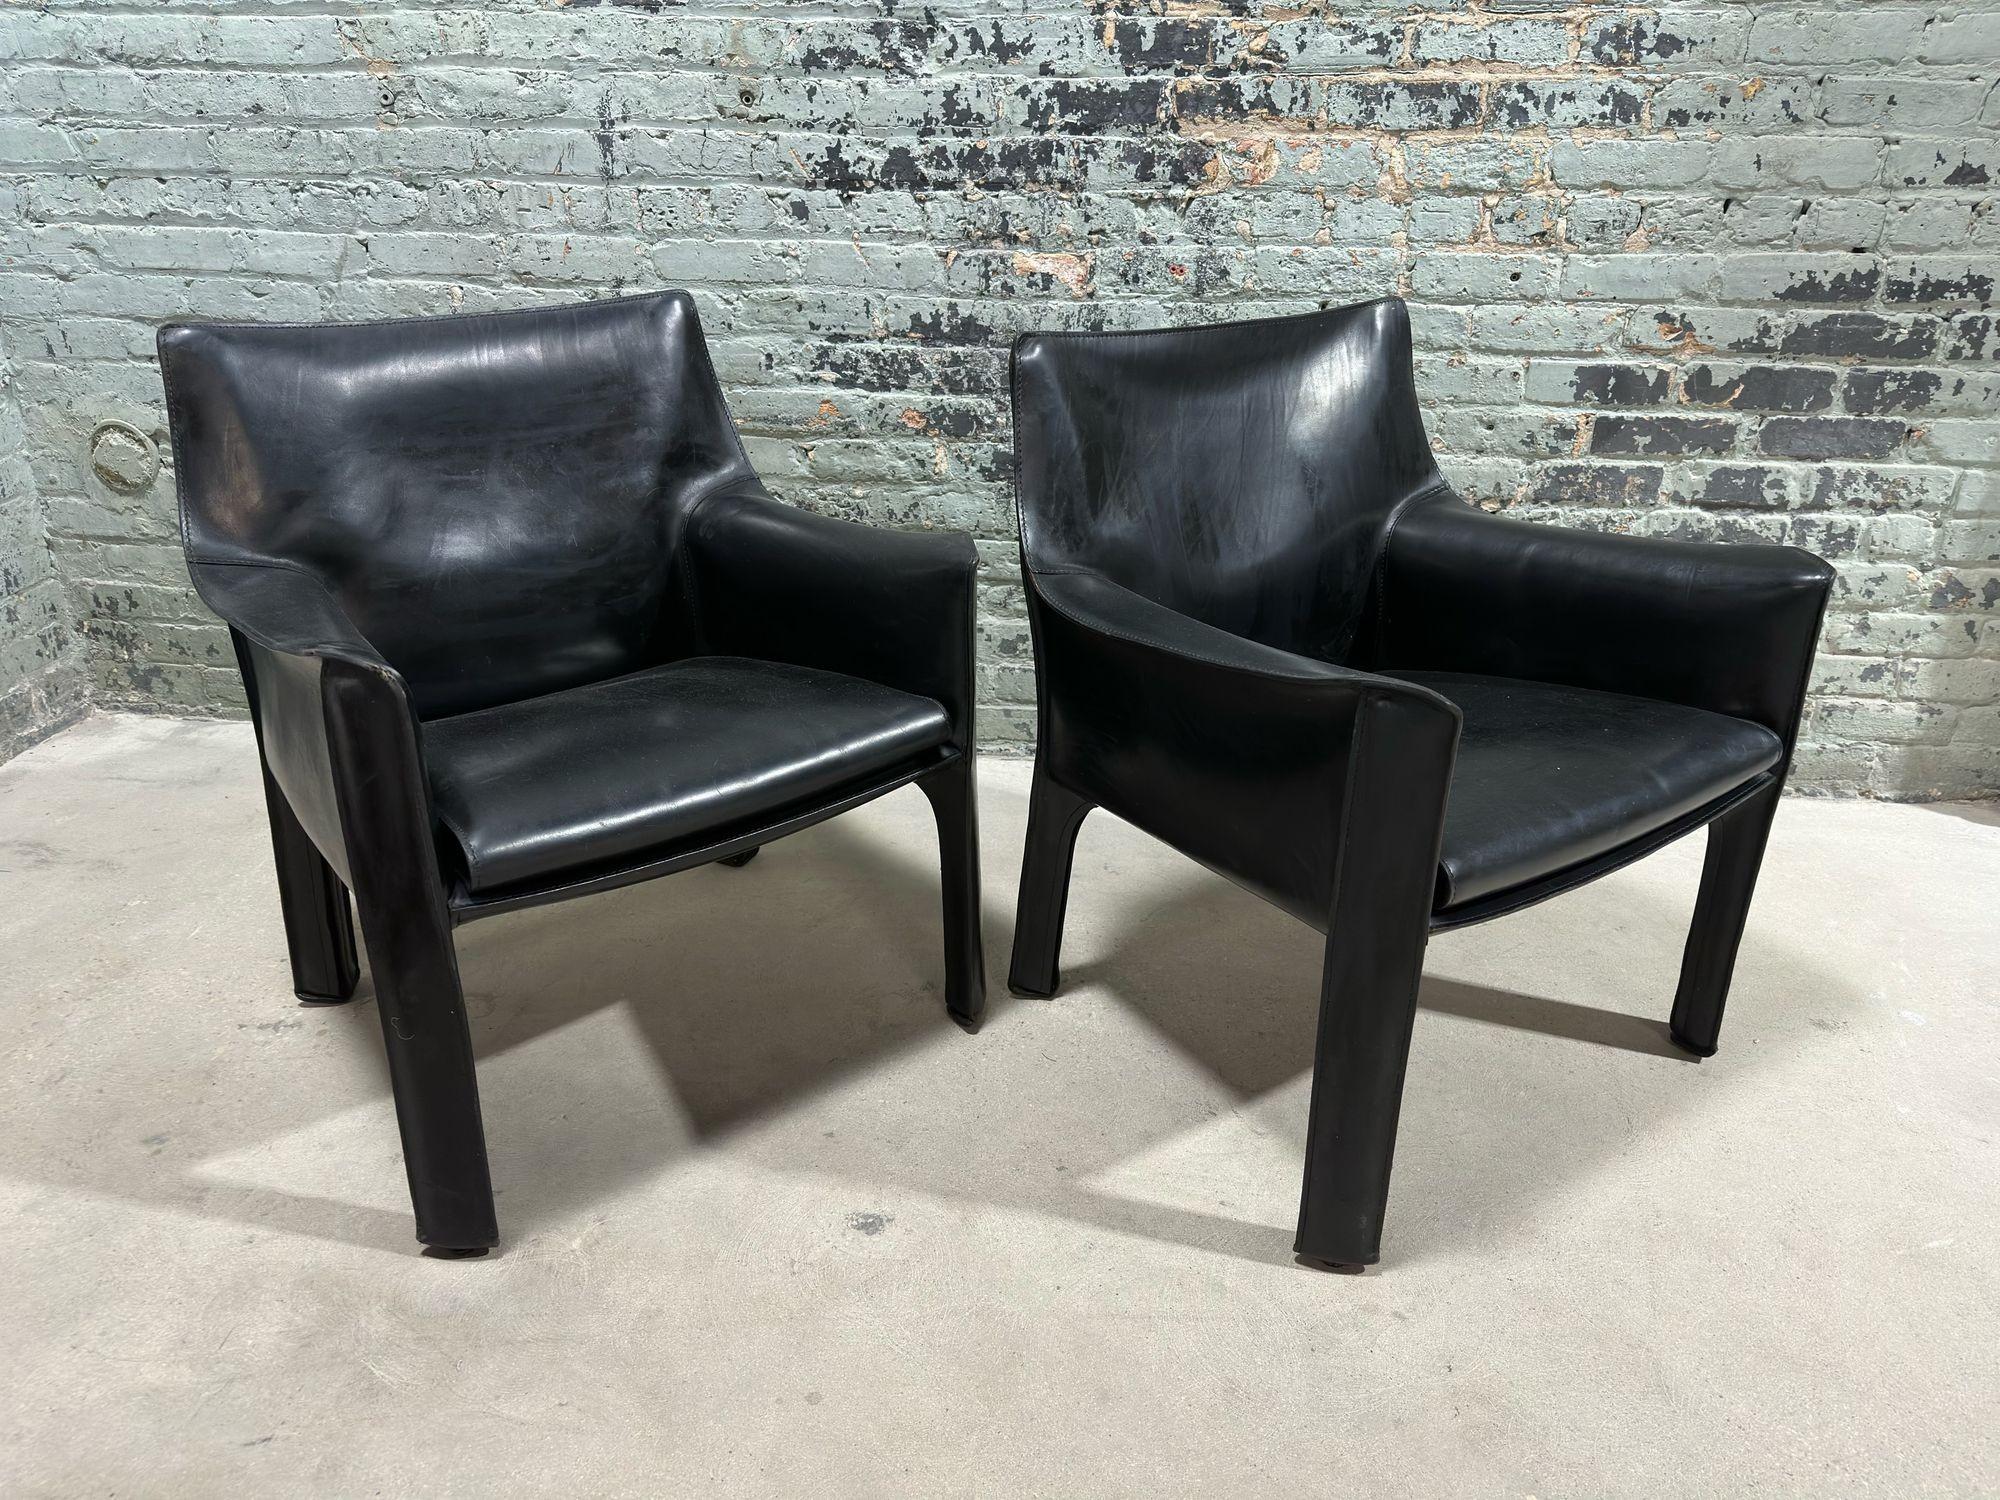 Pair Mario Bellini Black Leather Cab Chairs, Model 414 for Cassina Italy, 1980's.
Chairs are built with tubular steel frames and a thick saddle leather. The leather is kept in place with zippers on inside of the legs. Original condition. Signed by